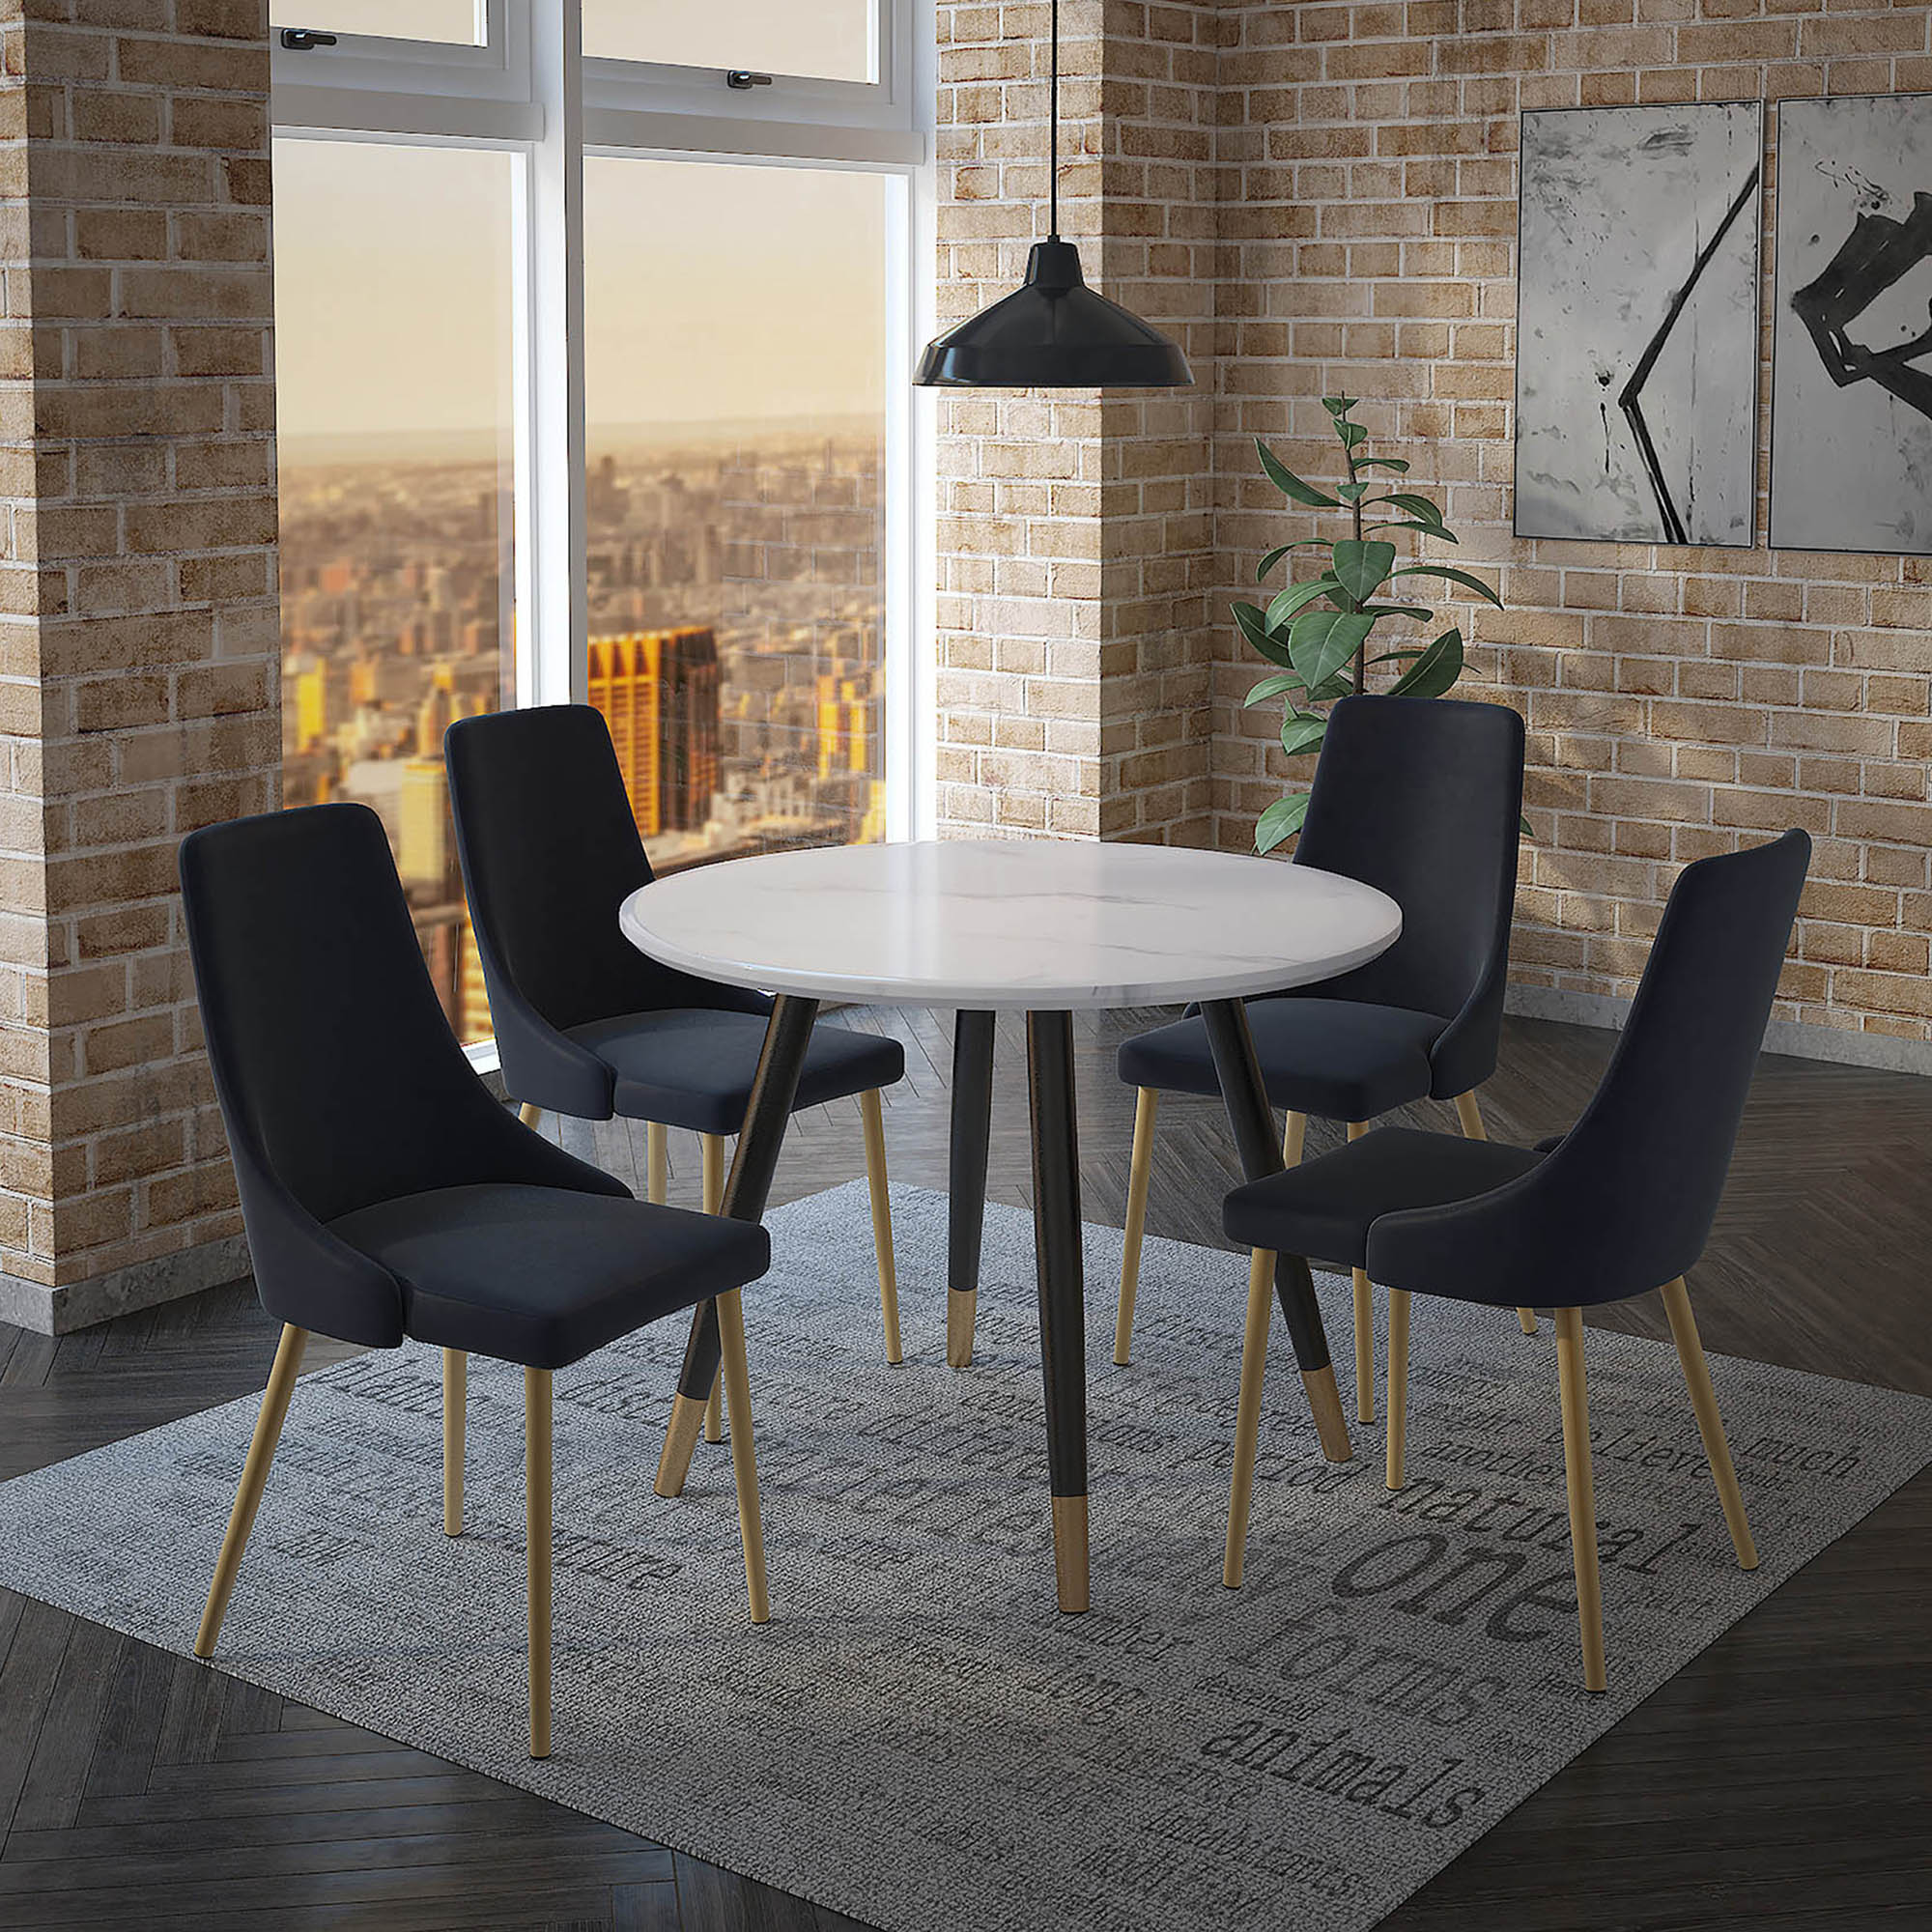 EMERY 40" ROUND TABLE / CARMILLA BLACK CHAIRS - 5PC DINING SET